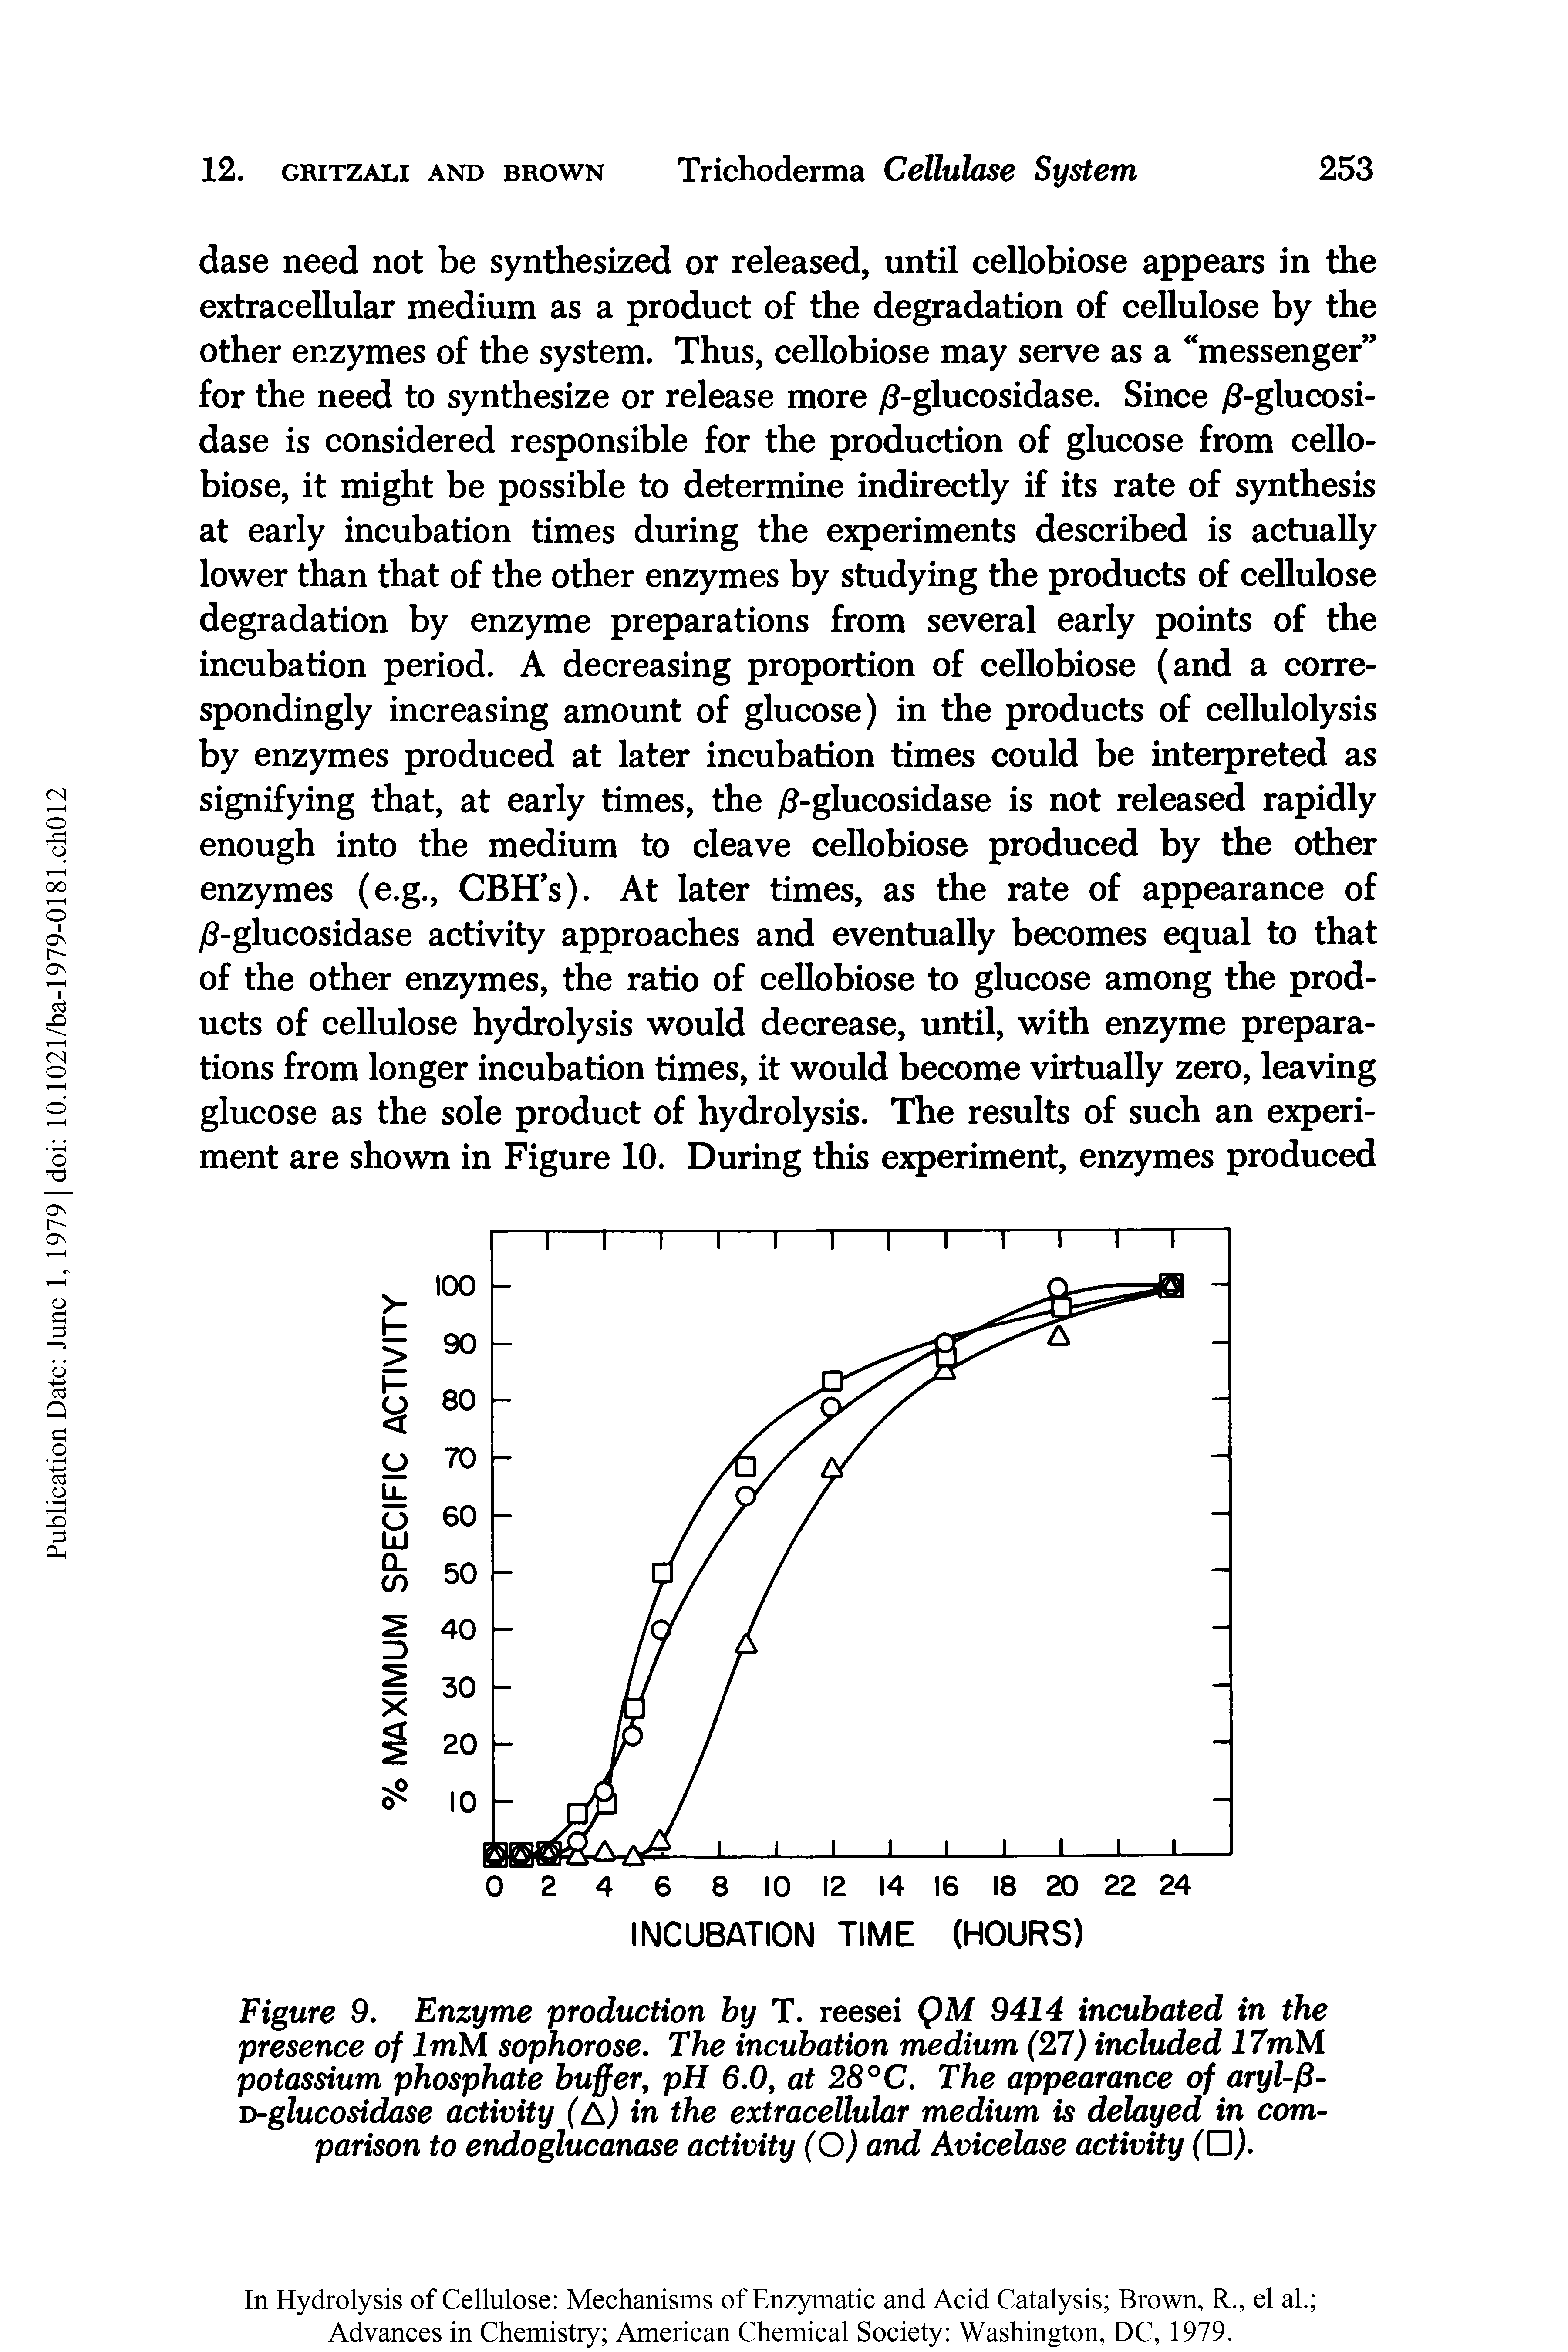 Figure 9. Enzyme production by T. reesei QM 9414 incubated in the presence of ImM sophorose. The incubation medium (27) included 17mM potassium phosphate buffer, pH 6.0, at 28°C. The appearance of aryl-p-D-glucosidase activity (A) in the extracellular medium is delayed in comparison to endoglucanase activity (O) and Avicelase activity ( ).